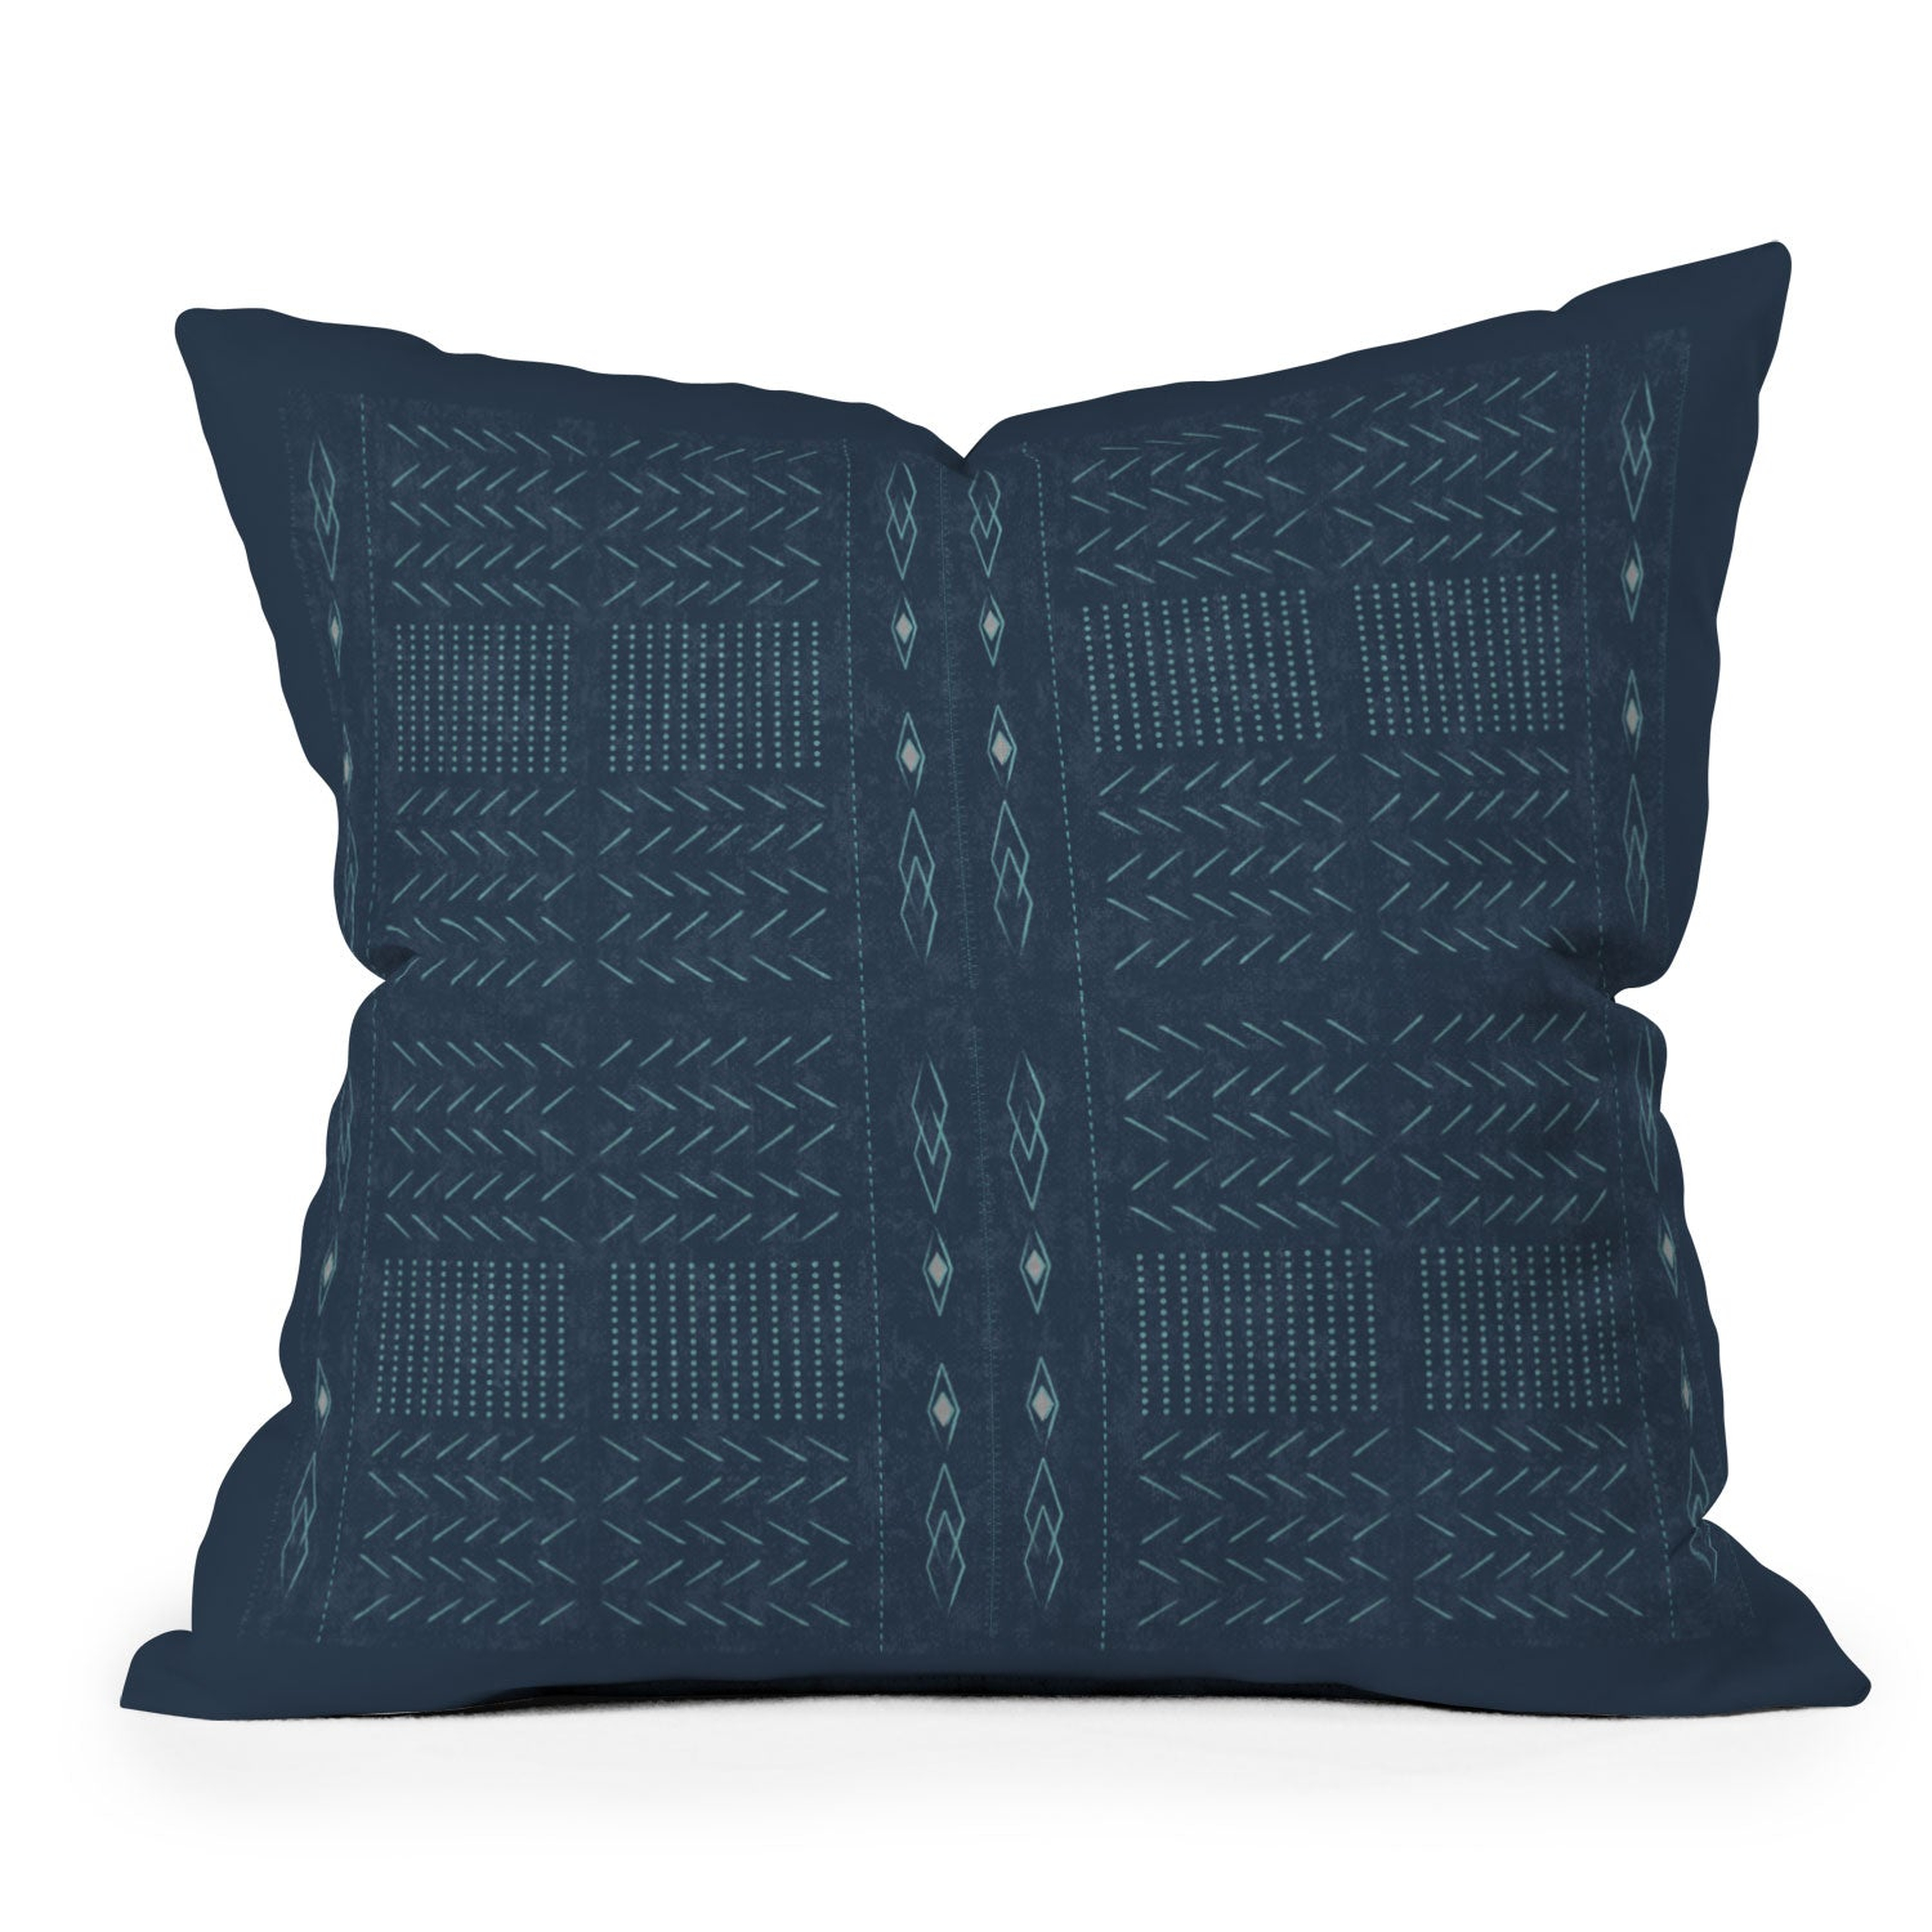 OUTDOOR THROW PILLOW NATIVE MUDCLOTH DENIM  BY MIRIMO - Wander Print Co.